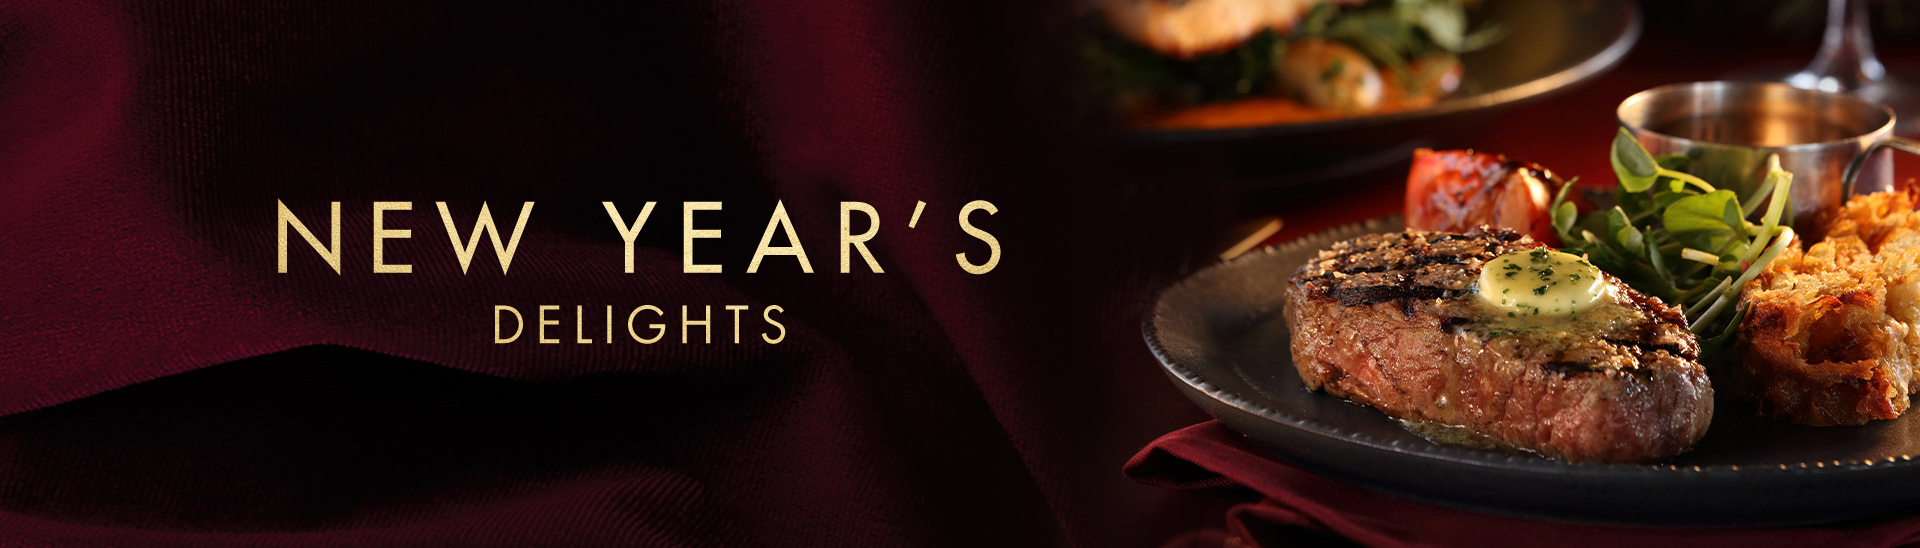 New Year’s Eve 2019 at Miller & Carter Solihull